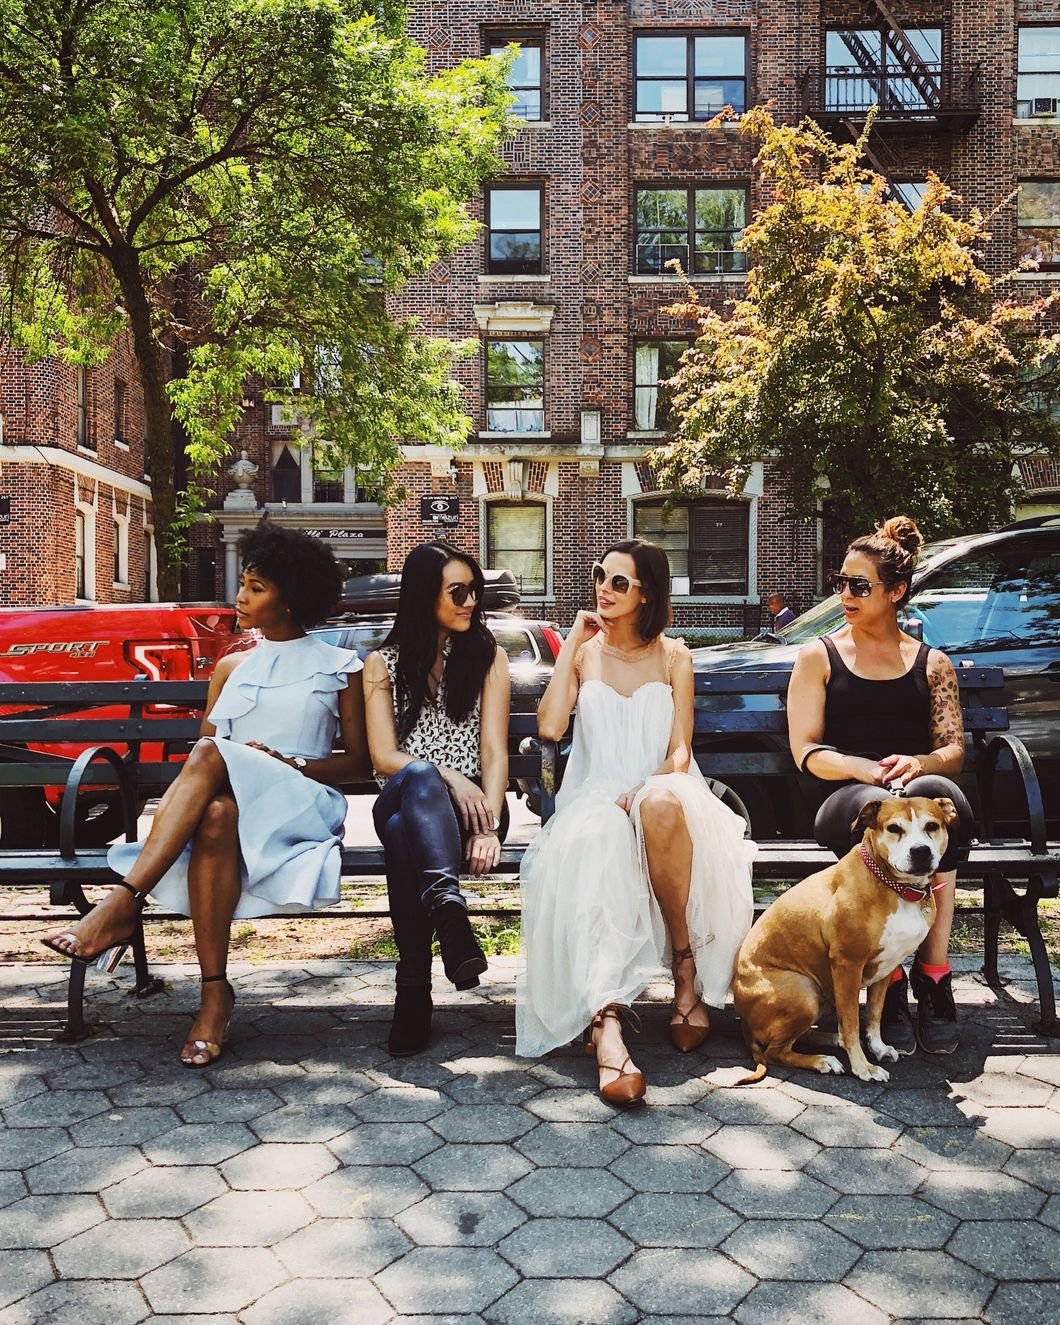 4 women sitting on a bench